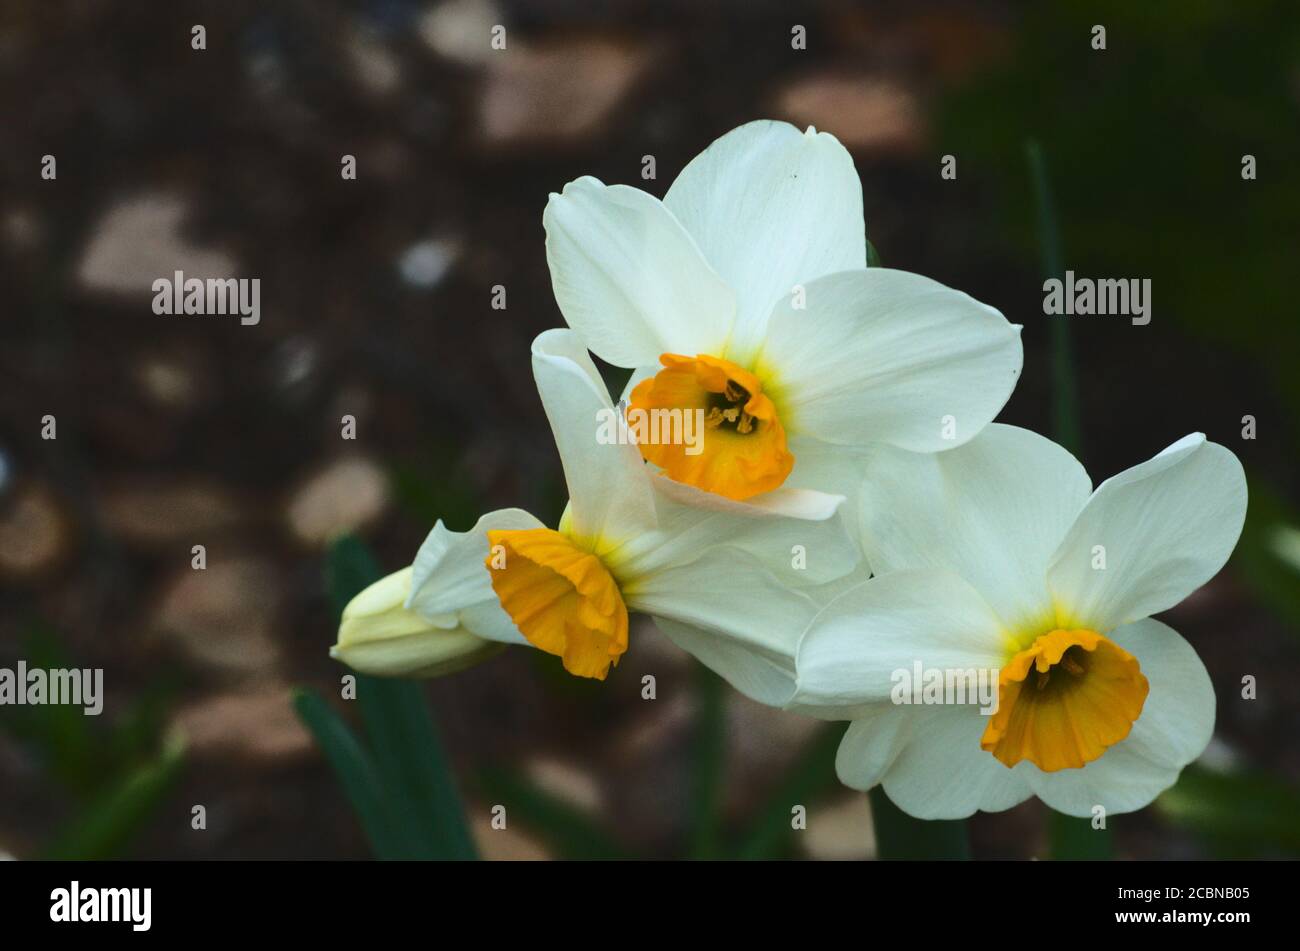 Daffodils, different composition-accenting its beauty , shape and design, white petals and yellow trumpet corona, creates simplistic elegance. Stock Photo